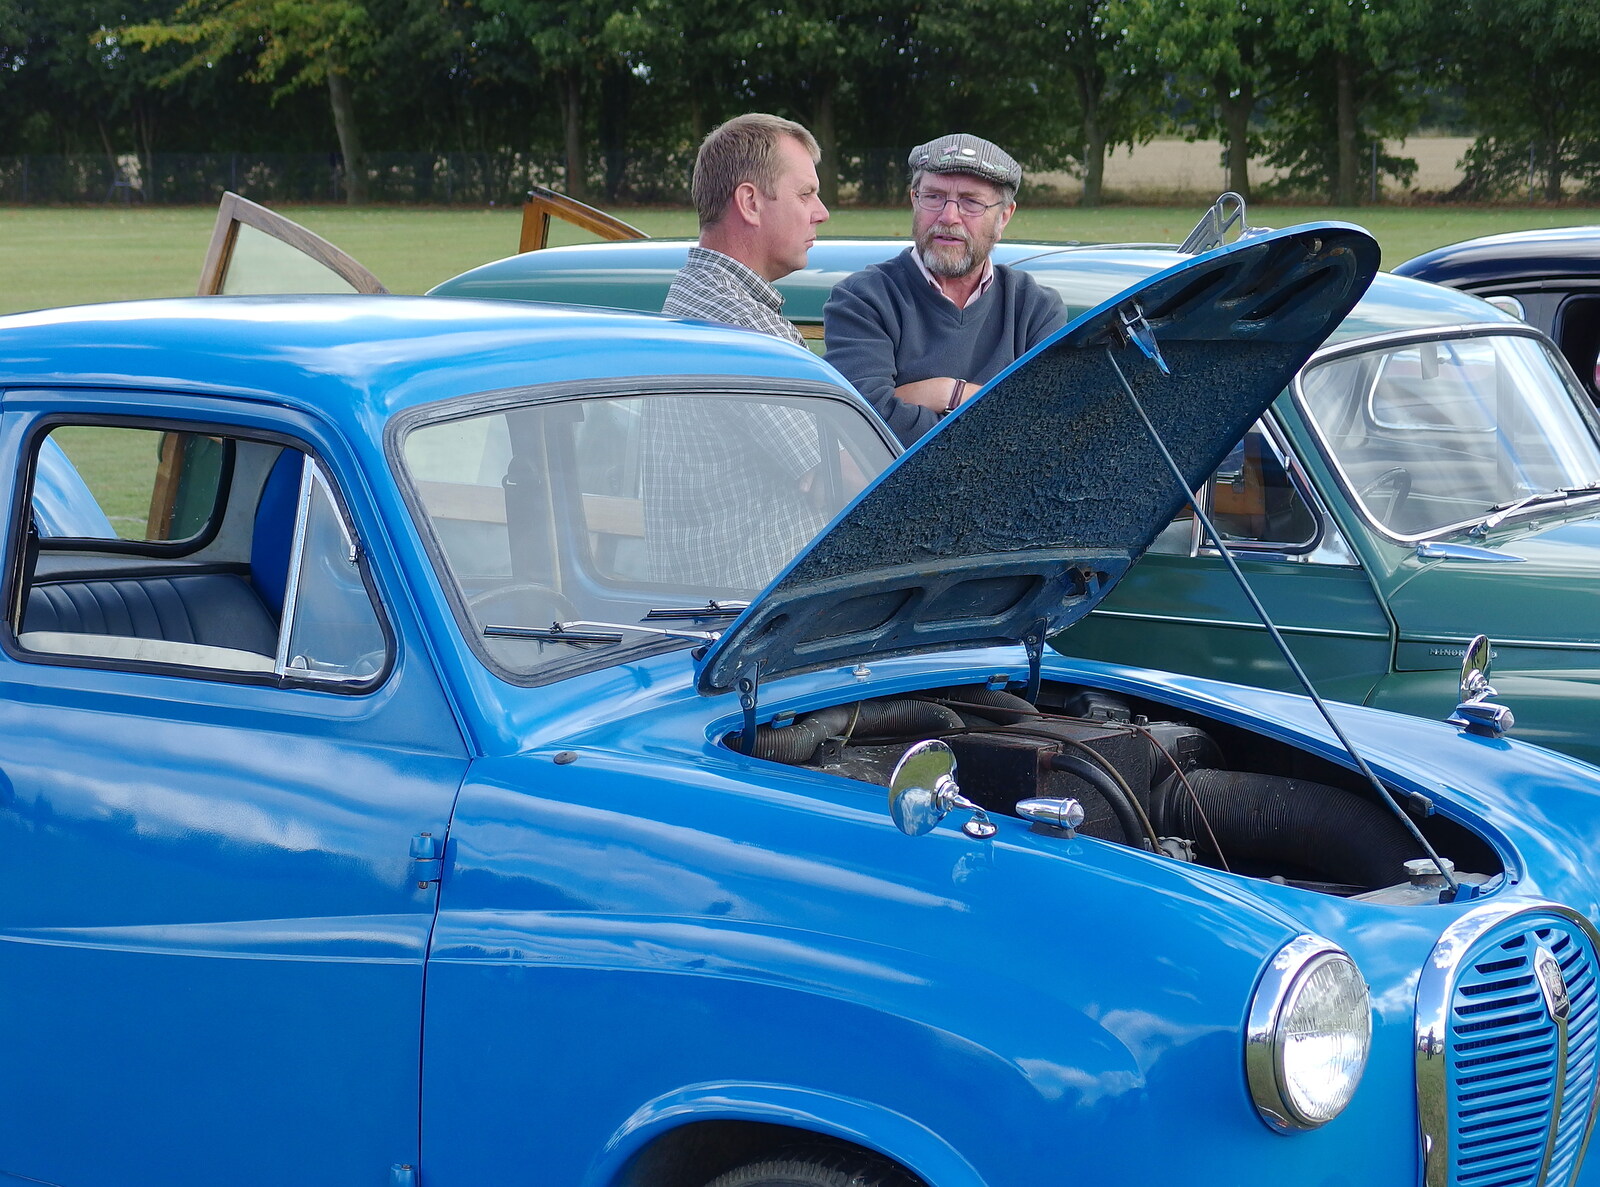 Andrew's got the bonnet of his A35 up from Stradbroke Classic Car Show, Stradbroke, Suffolk - 7th September 2013